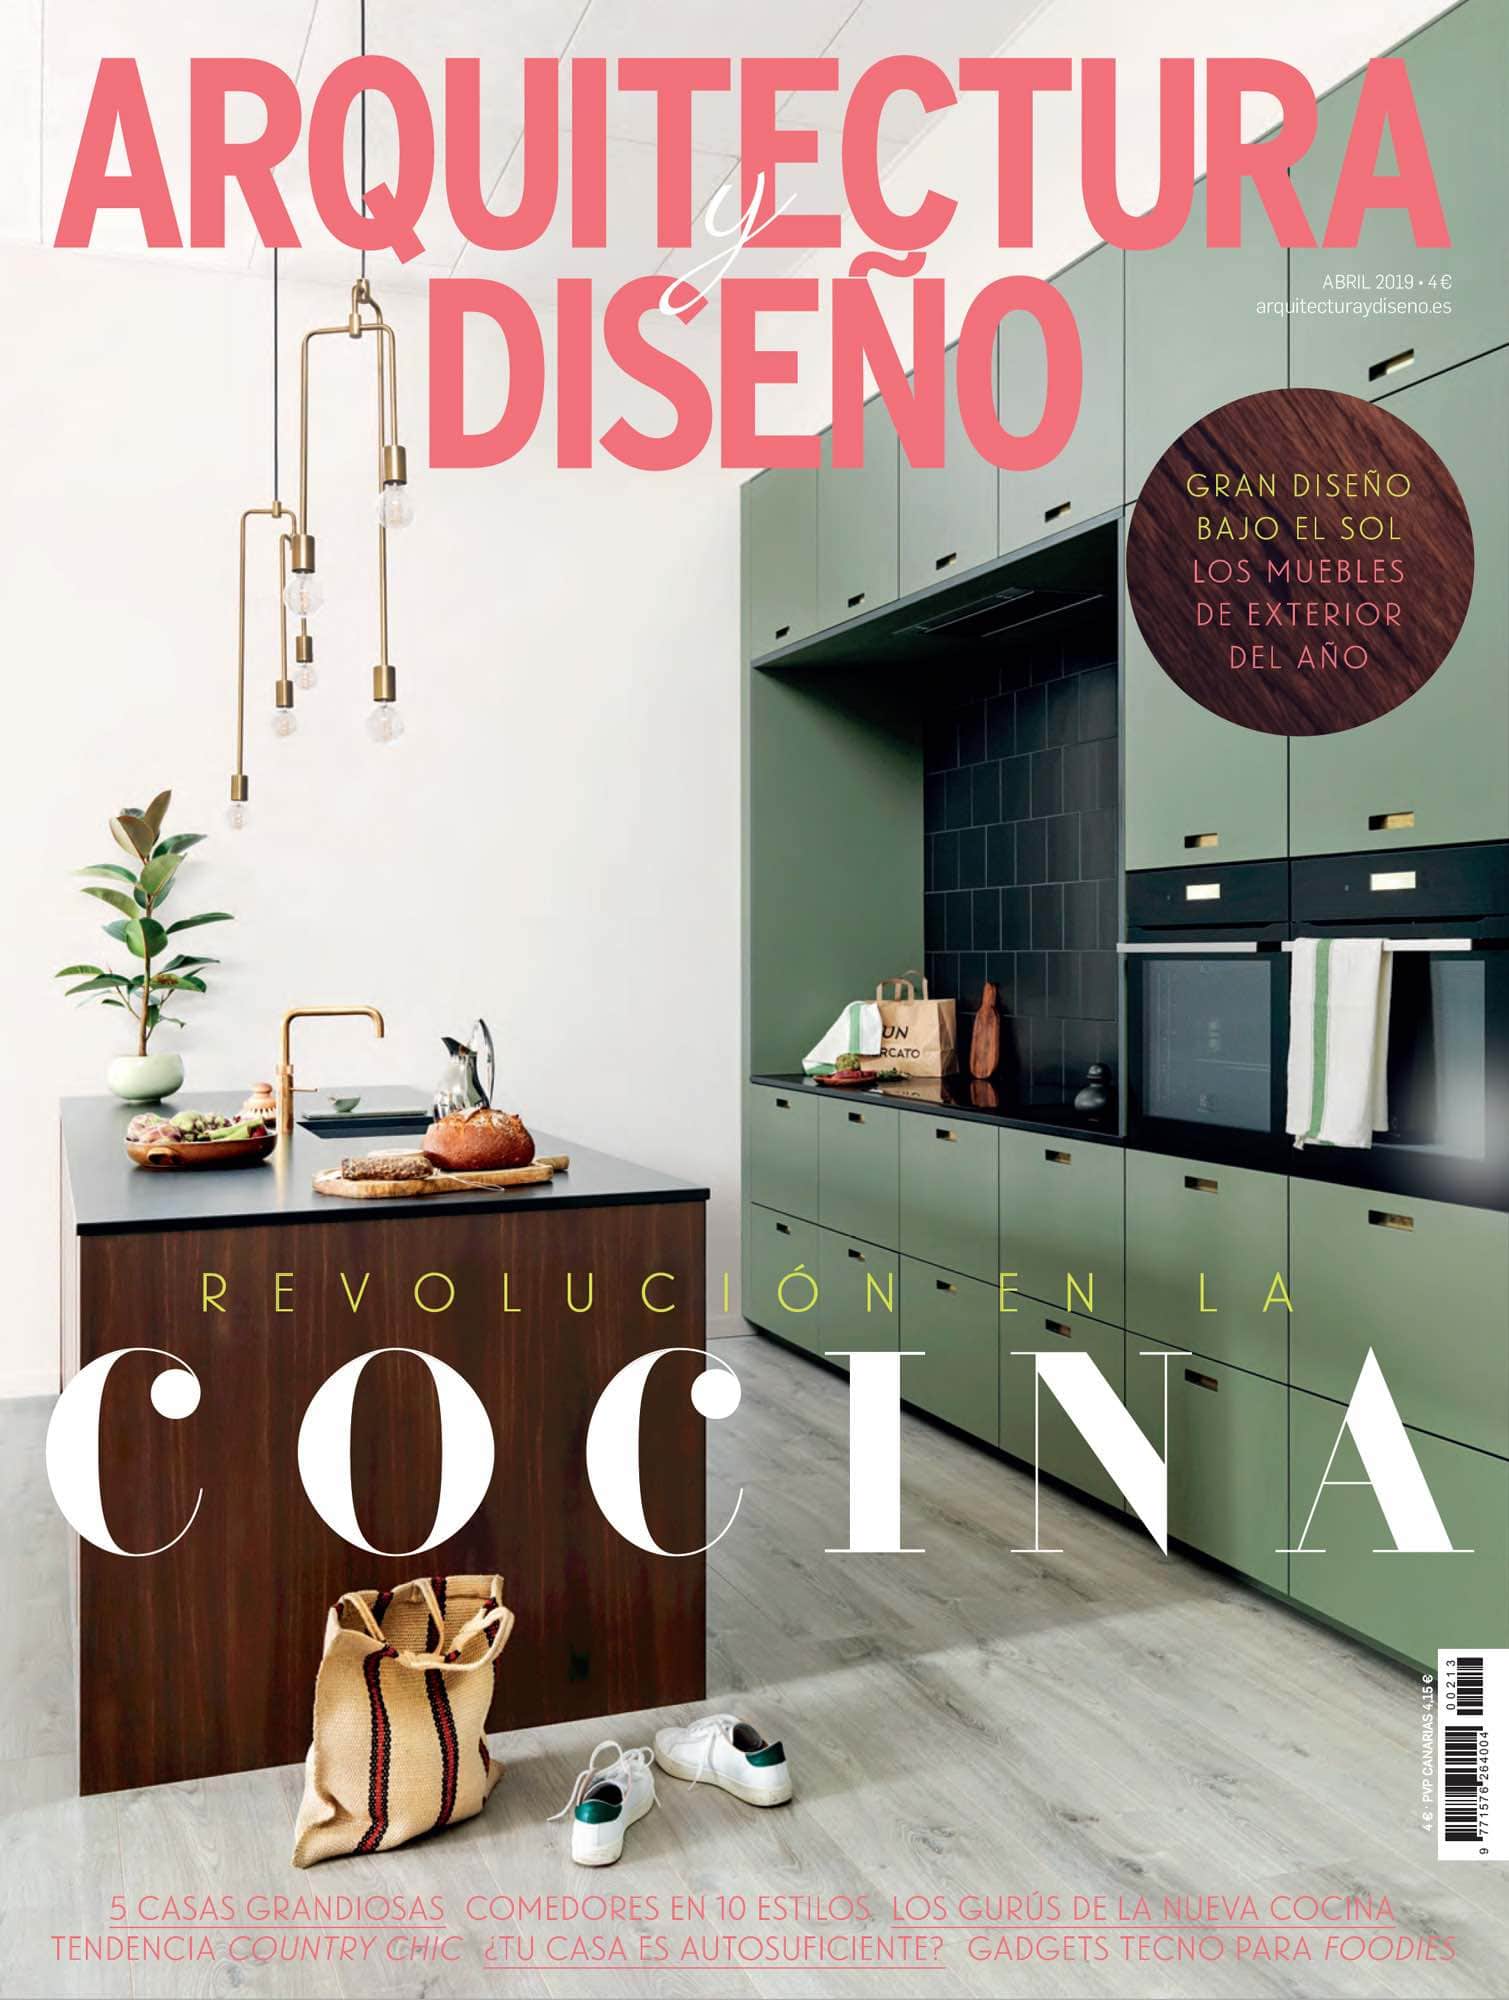 An image of the cover of April 2019 of Arquitectura Y Diseno featuring interior design by Carol Egan Interiors.